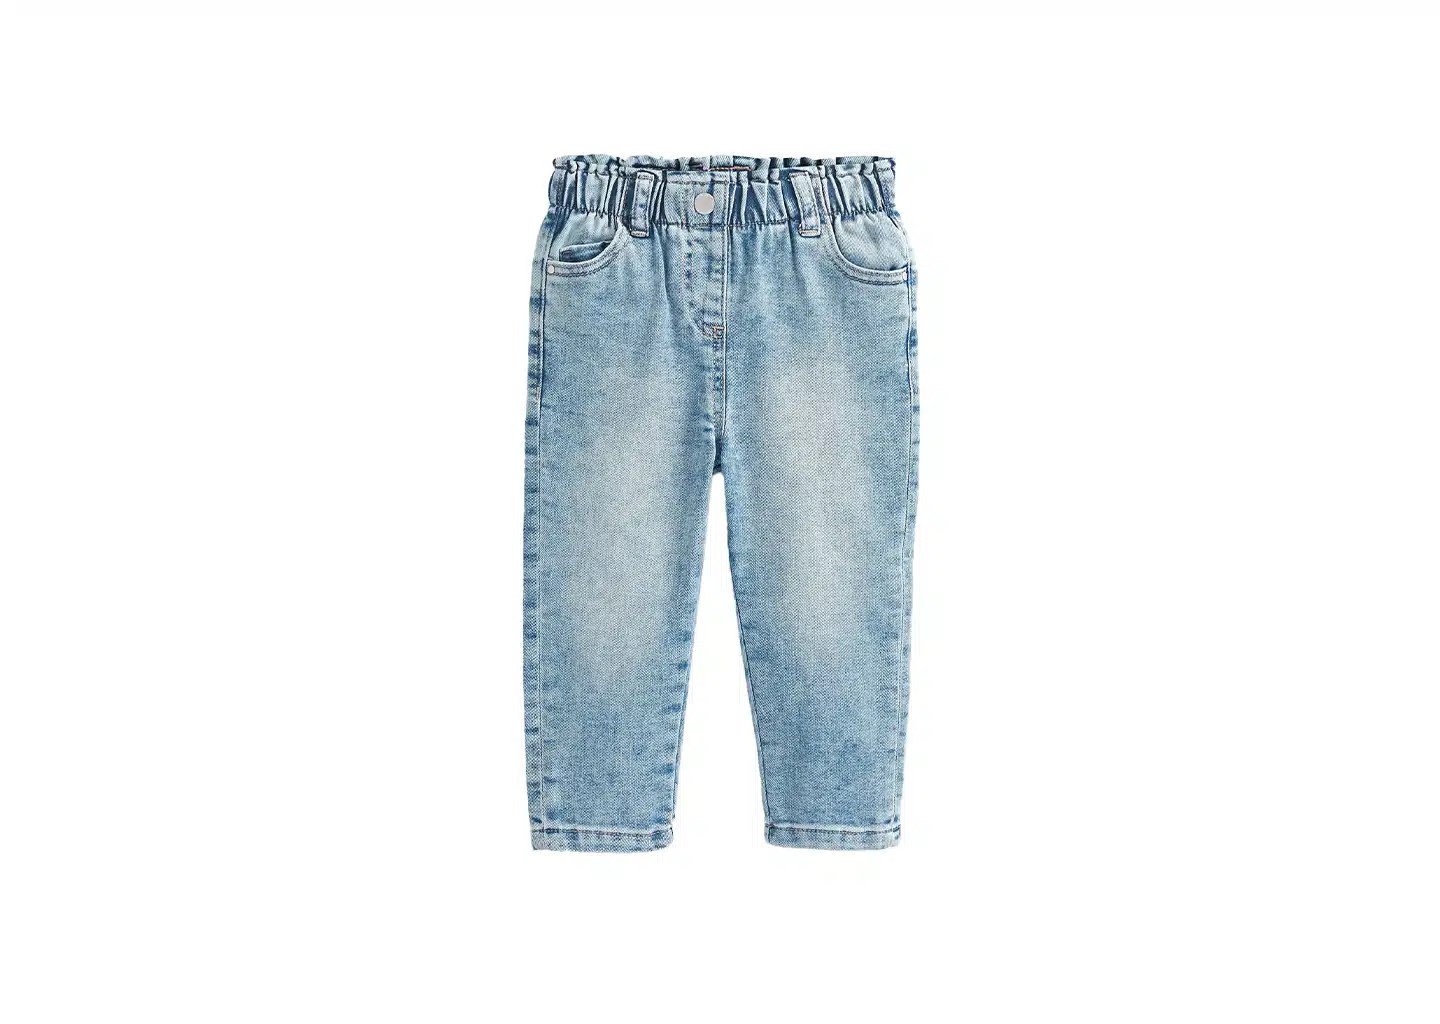 ThermoJeans Kinder